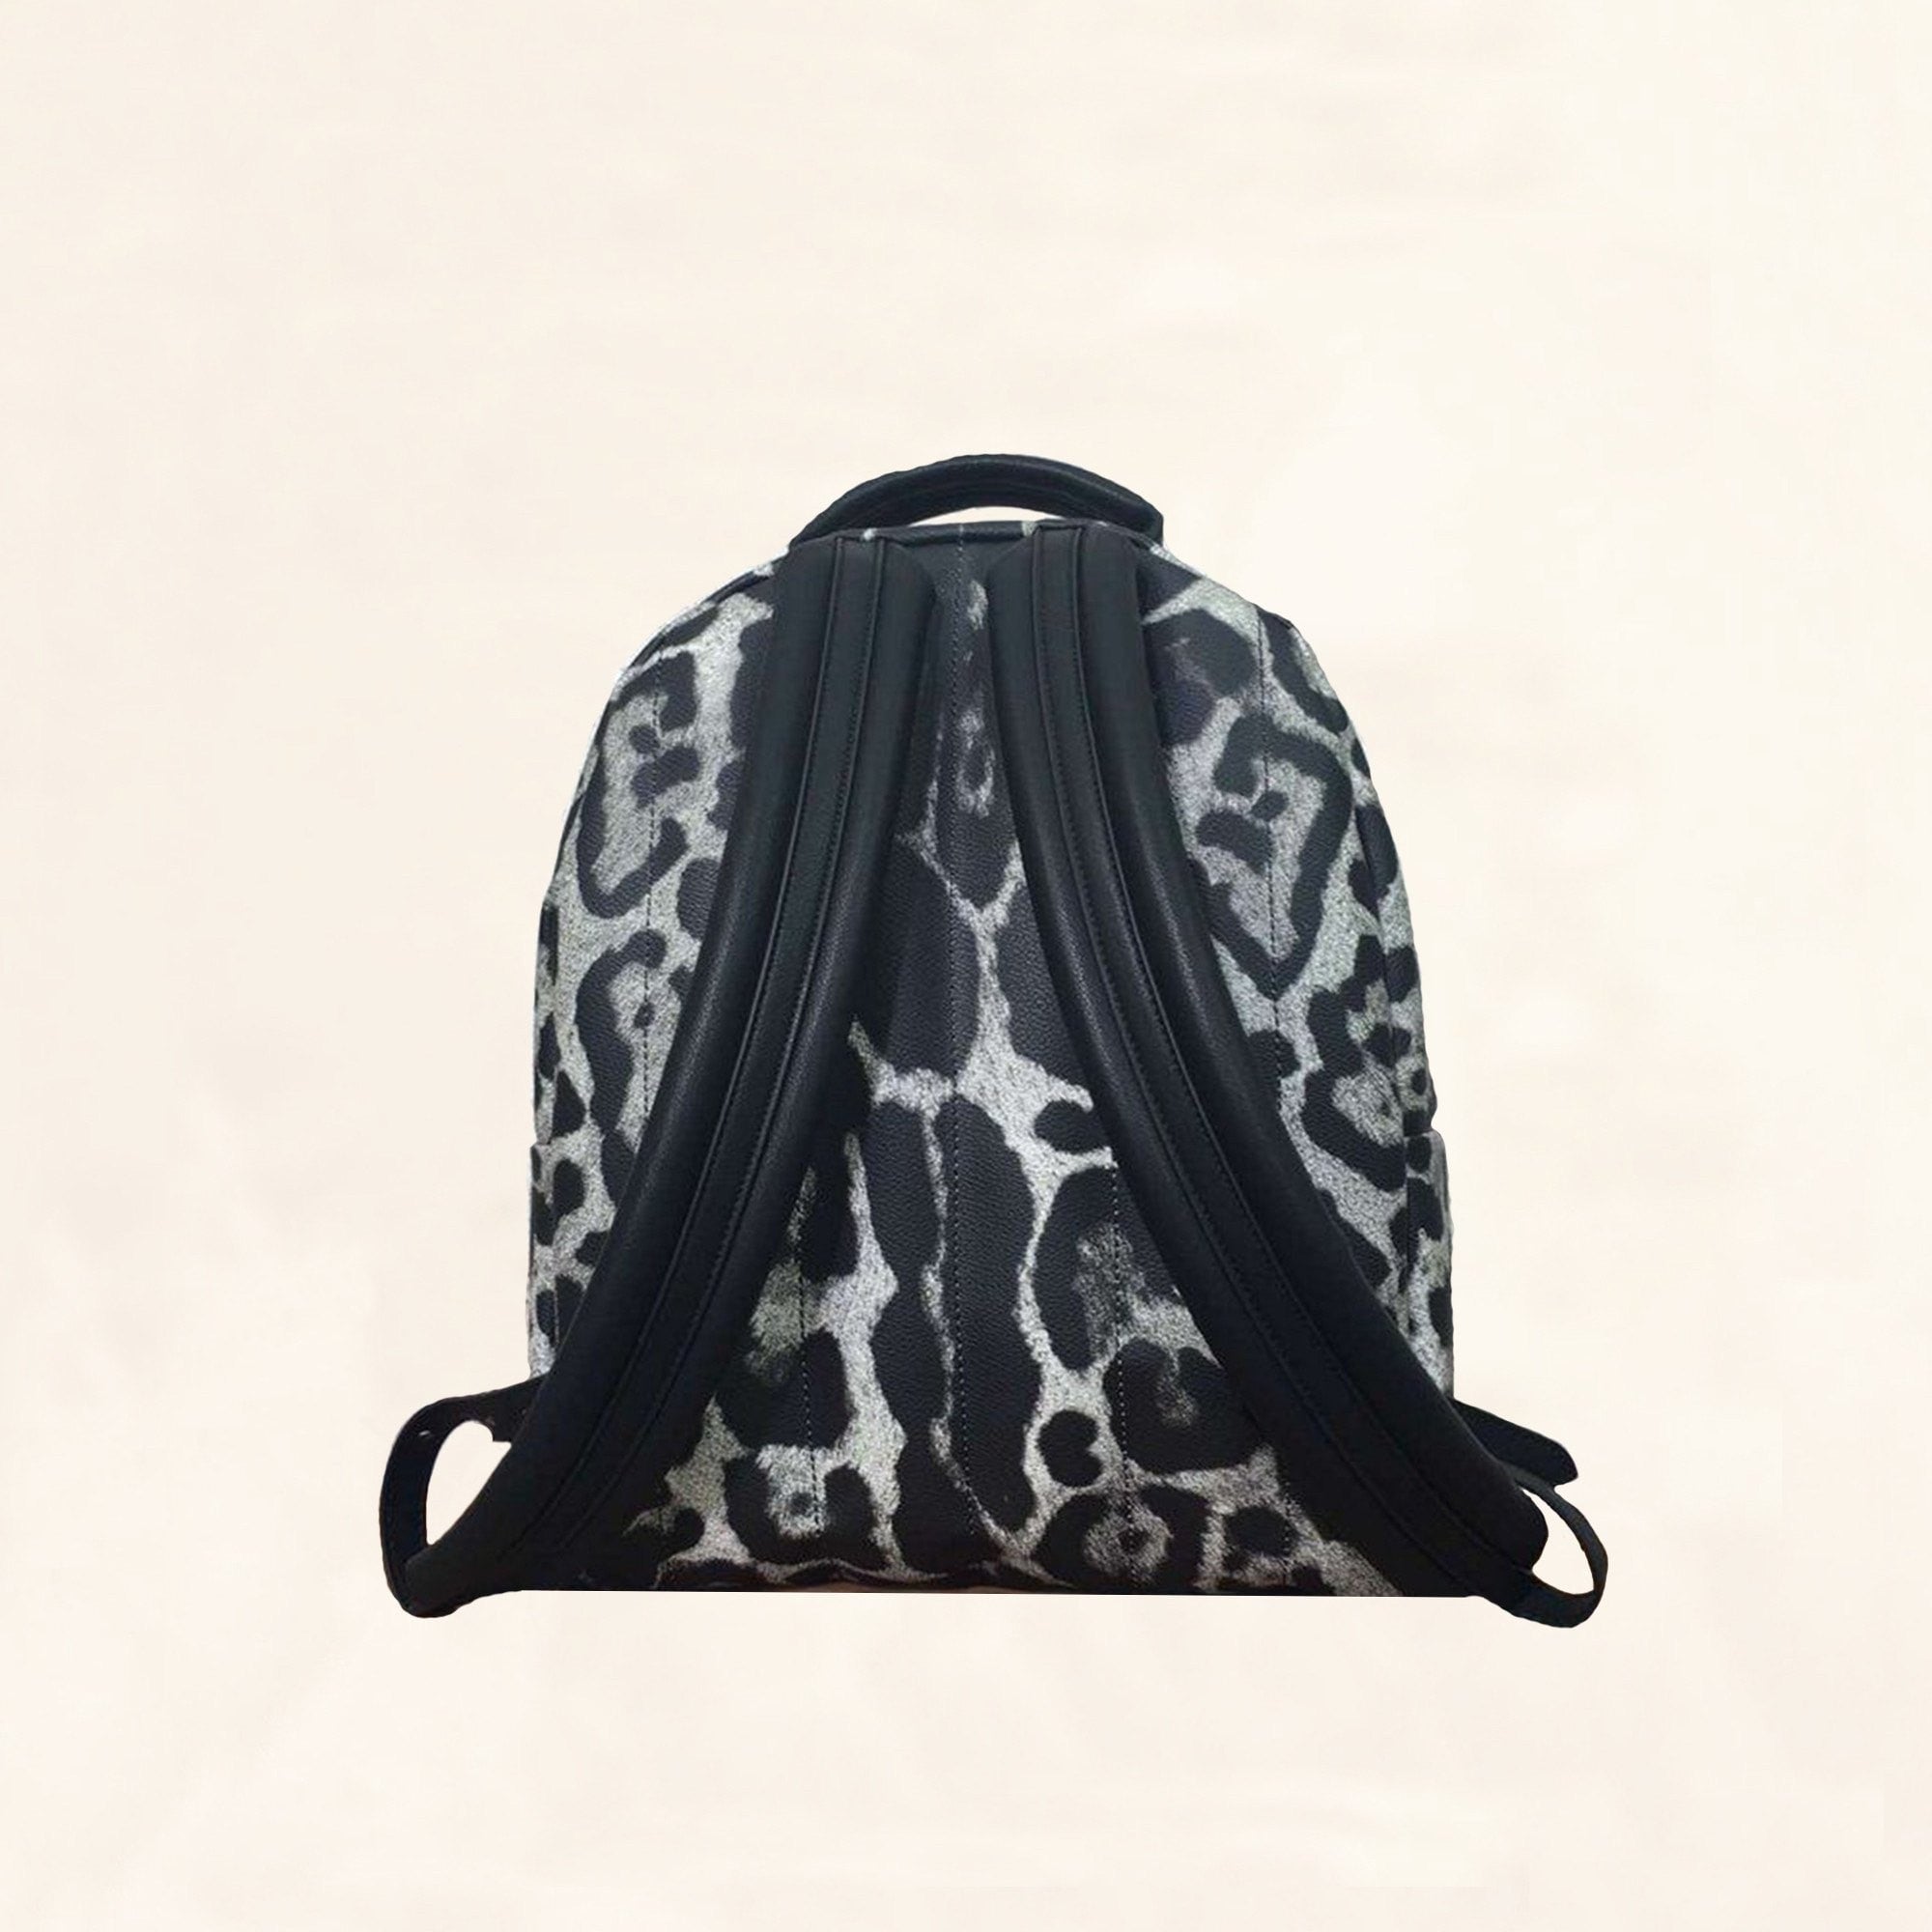 Louis Vuitton Palm Springs Backpack for Pets by bergdorfsims from Patreon